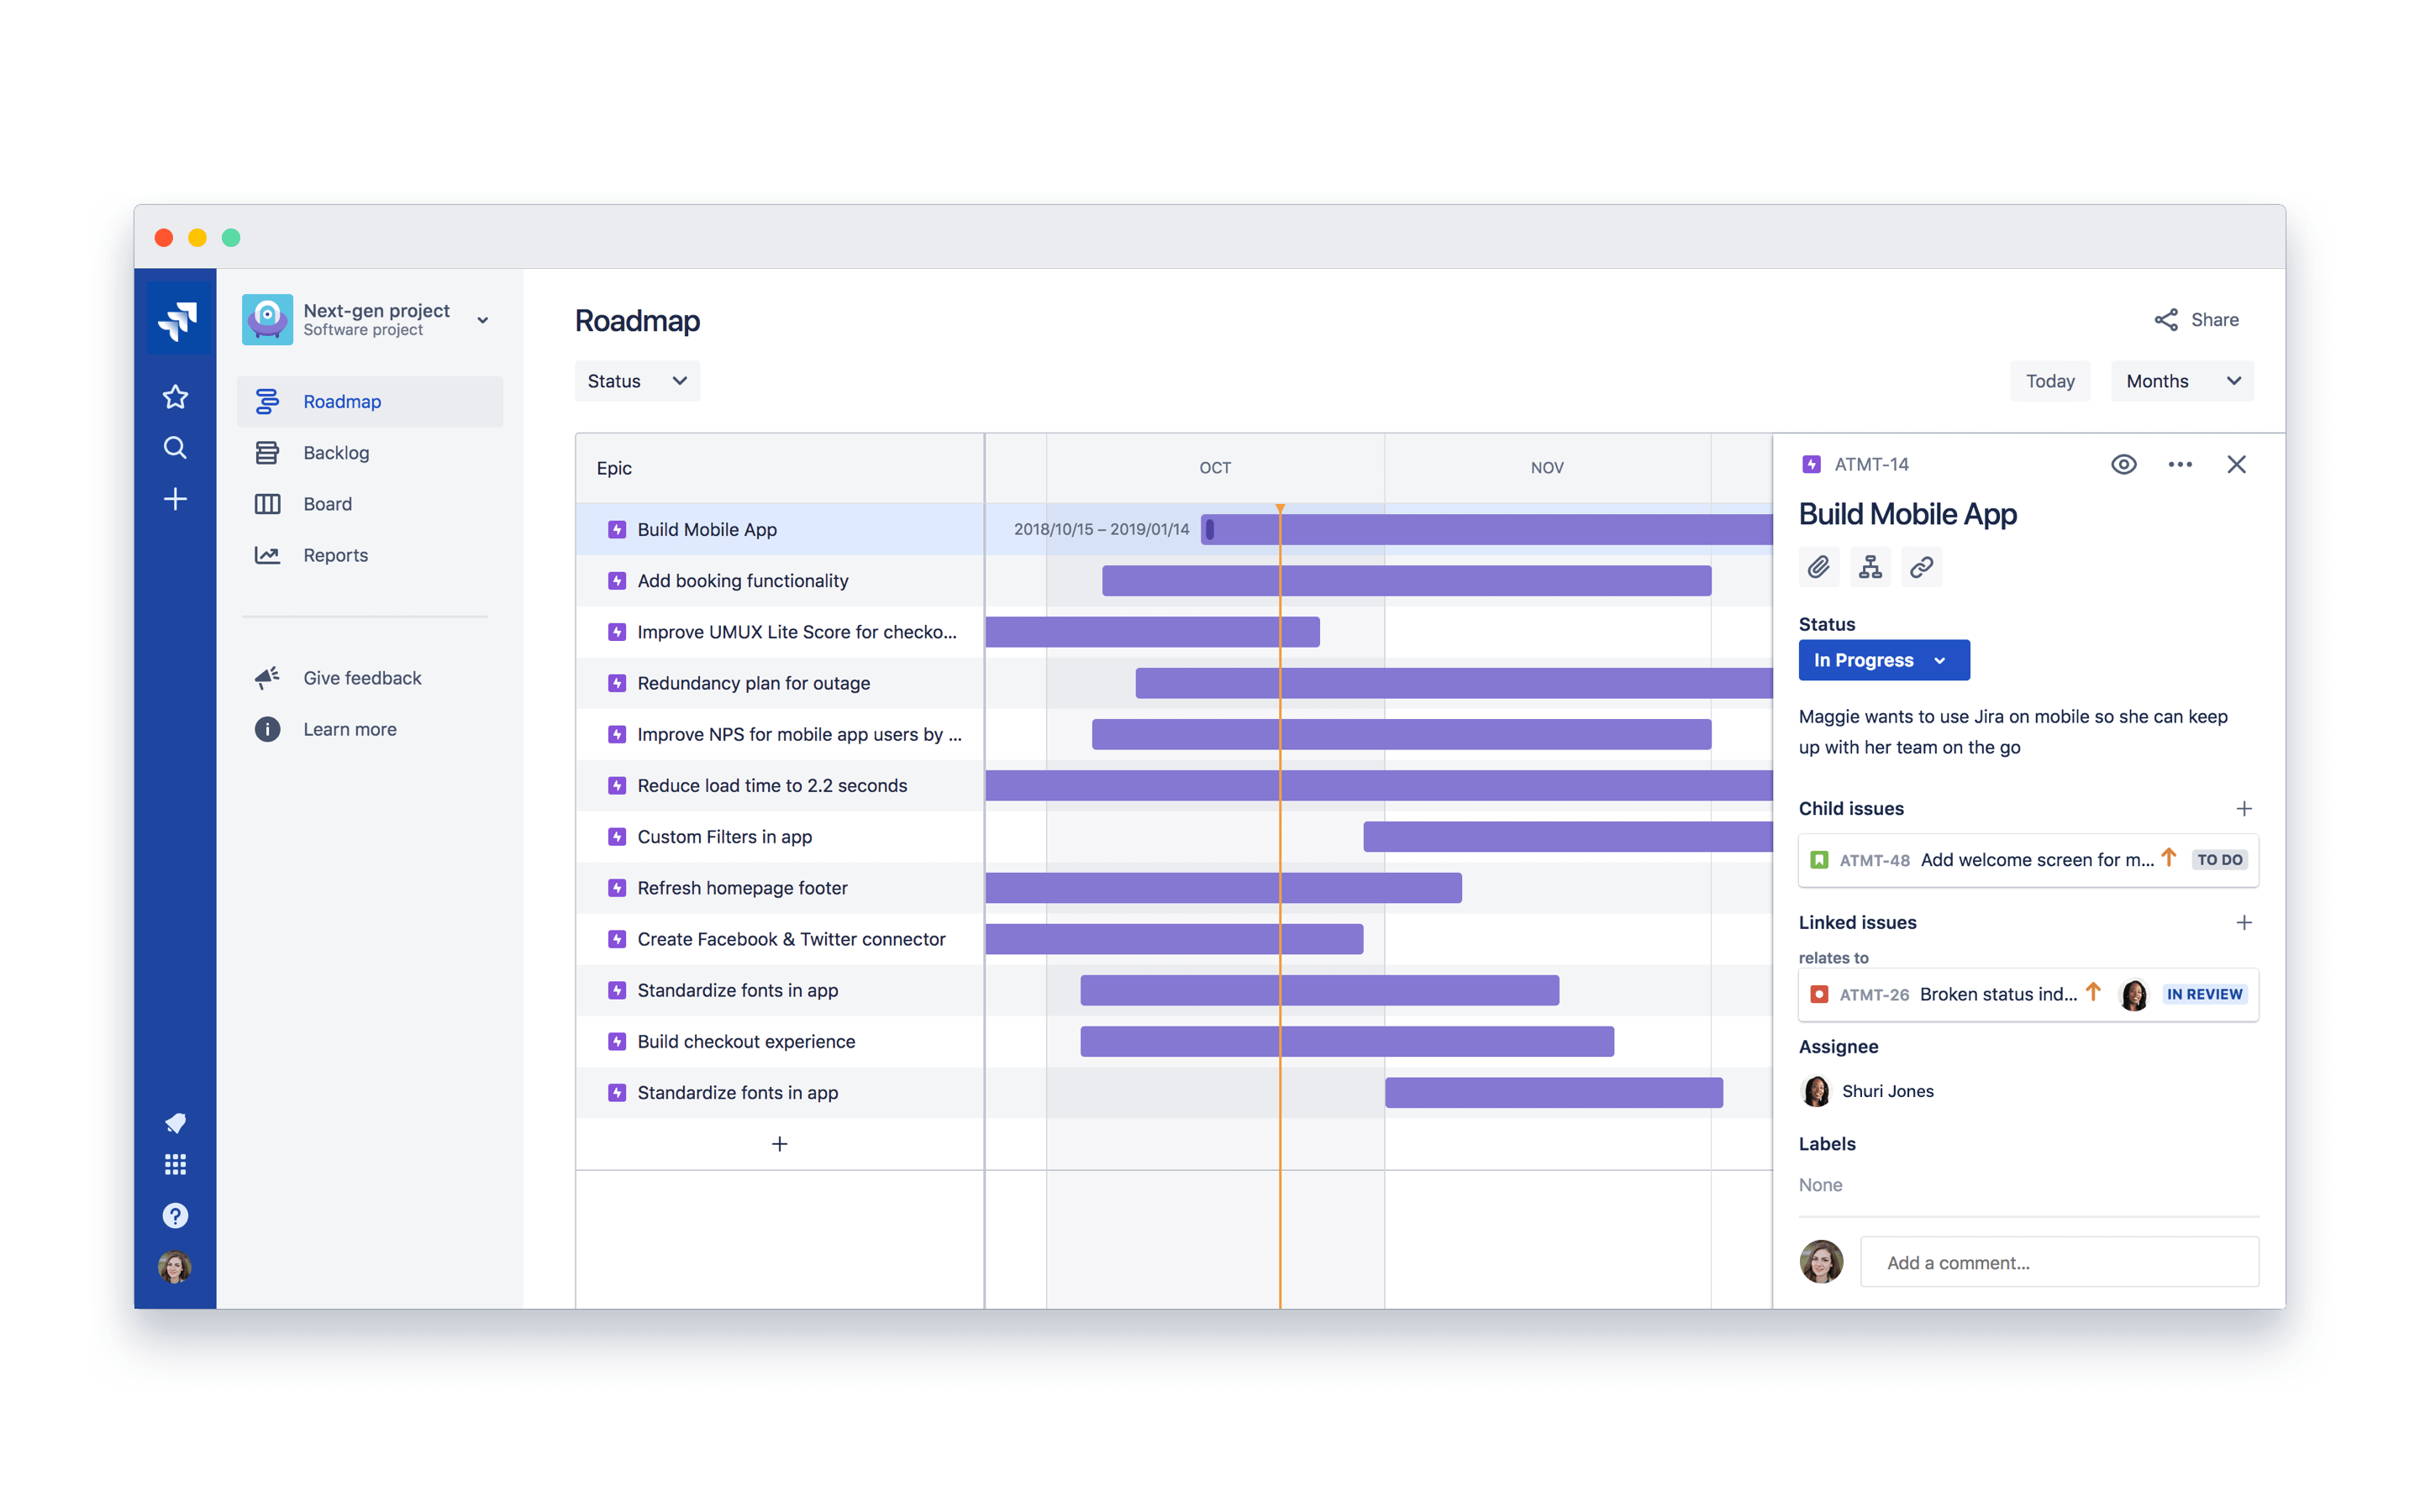 A product roadmap with detailed development tasks.